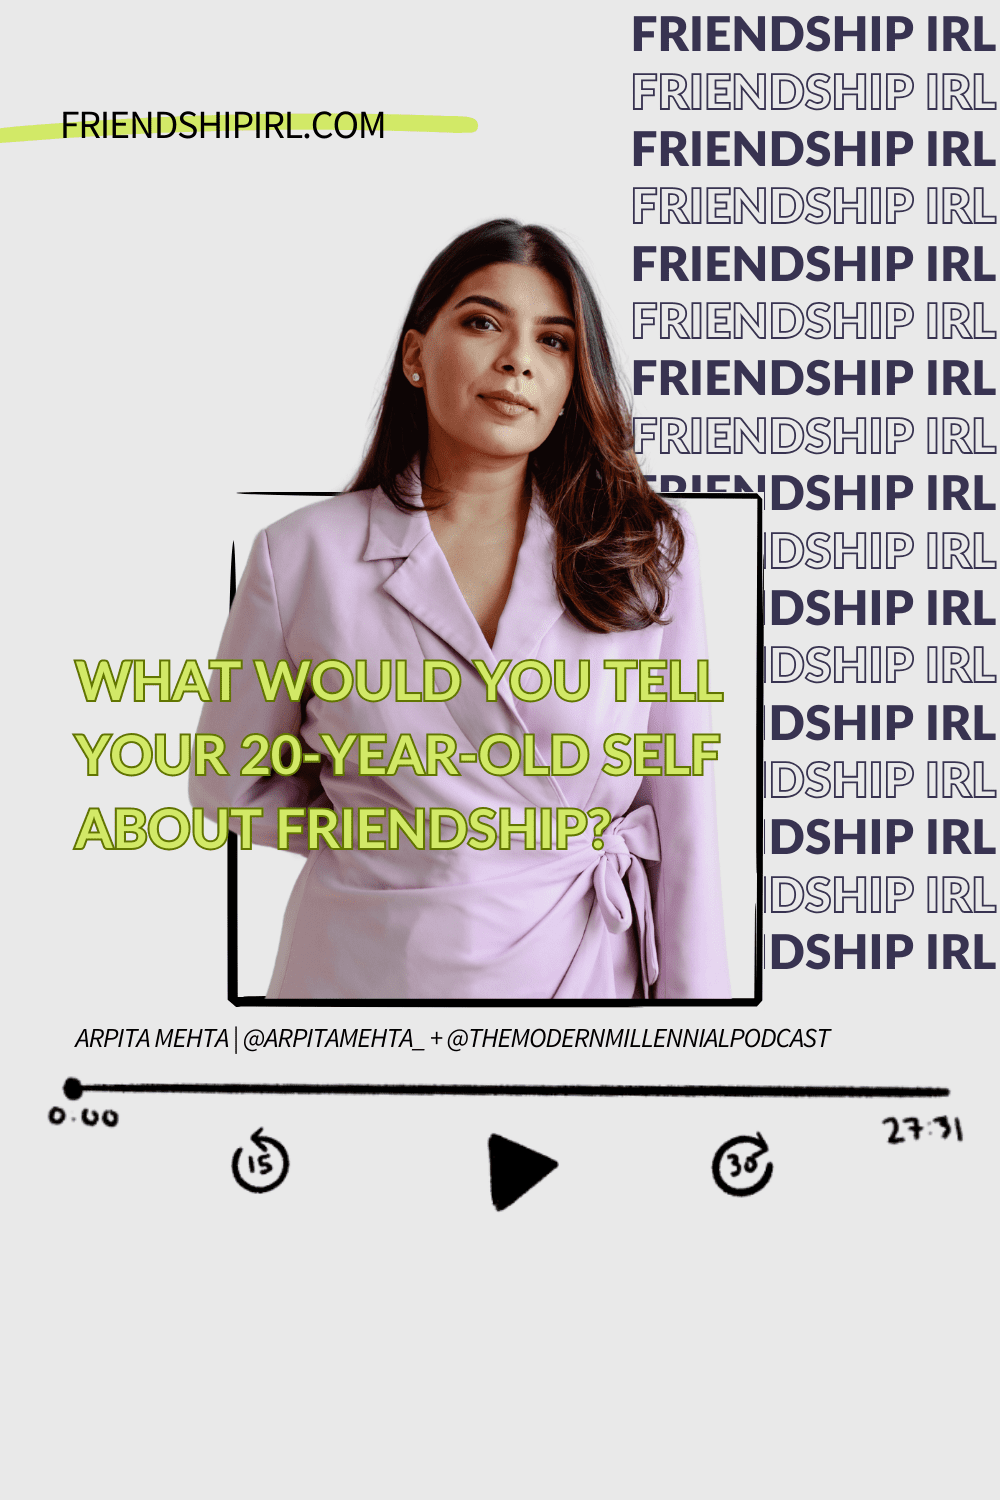 Friendship IRL Podcast Episdoe 63 with Arpita Mehta- What I Wish I Knew About Friendship in my 20s